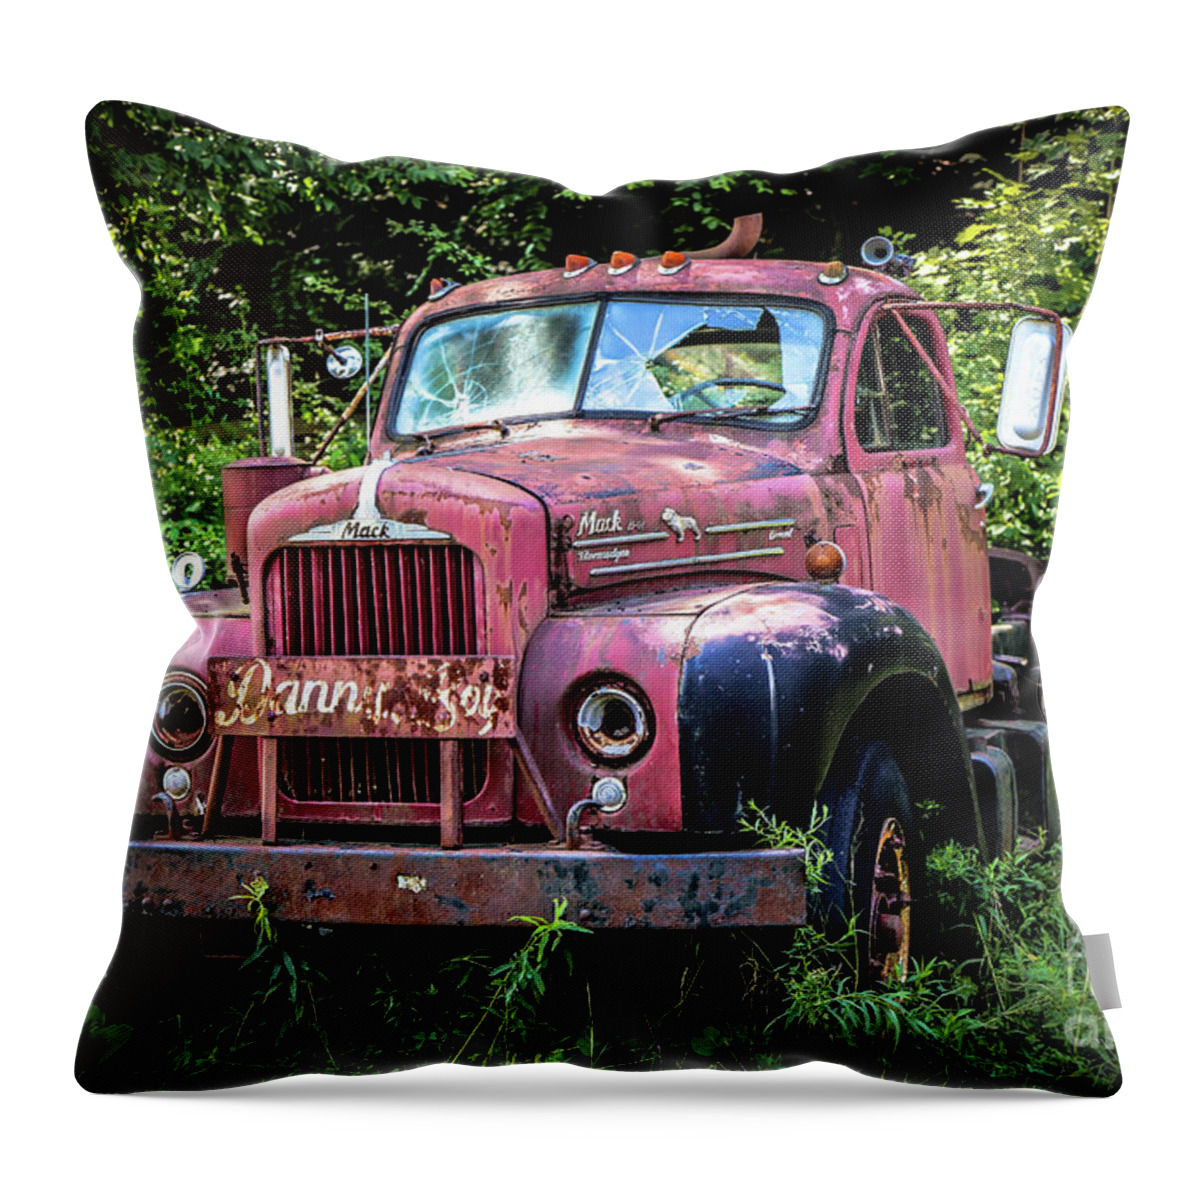 Mack Truck Throw Pillow featuring the photograph Danny Boy by Veronica Batterson